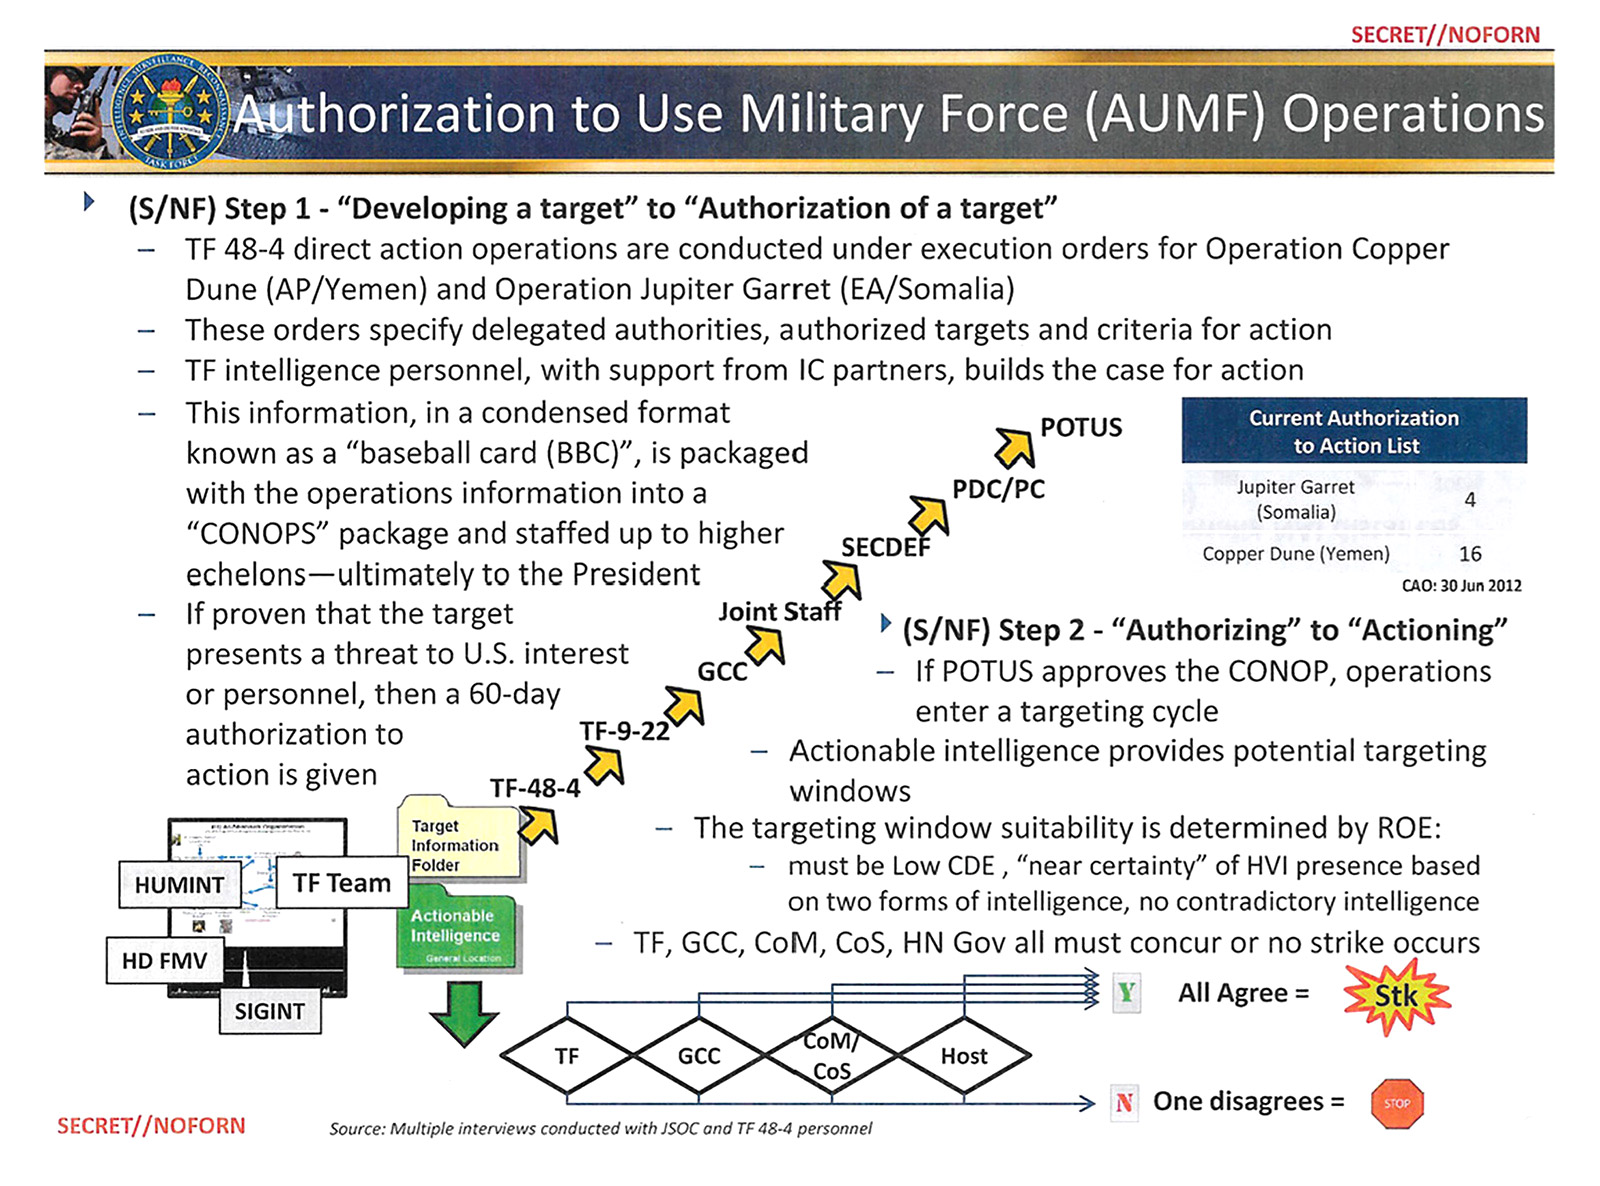 A slide from a May 2013 Pentagon presentation leaked to The Intercept. It details the path followed by dossiers compiled by TF-48-4 (a US Joint Special Operations Command task force in Yemen and Somalia) on people deemed potential targets. Such dossiers move up the chain of command all the way to the president, who makes the final decision to kill that individual. Once approved, a second protocol is followed to determine the exact means to be used—almost invariably a drone strike. Acronyms used in the slide include GCC (Geographic Combatant Command); SECDEF (Secretary of Defense); PDC/PC (Principals’ Deputies Committee/Principals Committee); CoM (Chief of Mission); and CoS (Chief of Station).